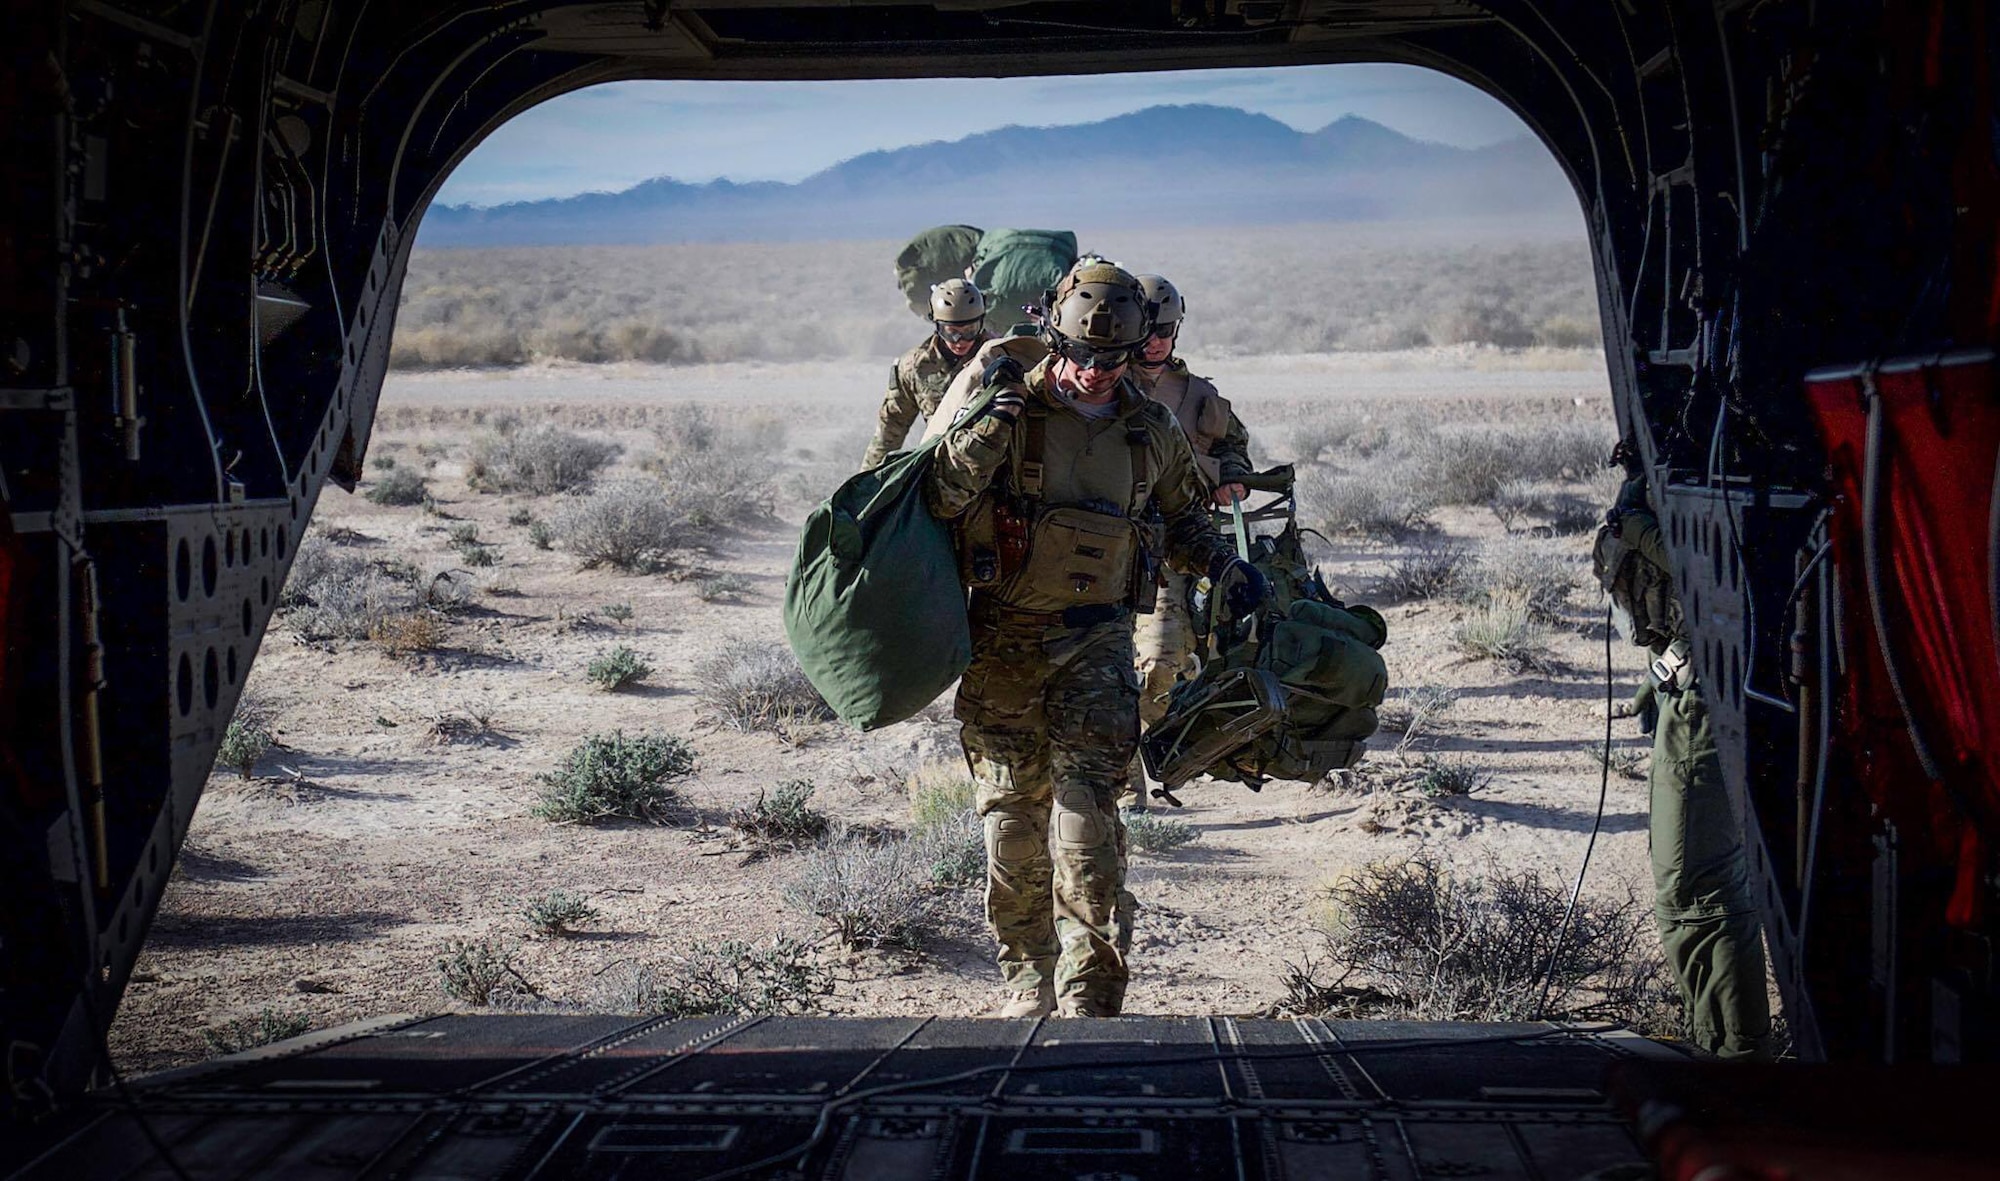 Survival, Evasion, Resistance, and Escape (SERE) specialist are picked up by a CH-47 Chinook after performing static-line jumps on the Nevada Test and Training Range, during Red Flag 17-2, March 7, 2017. SERE specialists lead the Air Force emergency parachuting program and conduct extensive testing of parachuting systems. They are uniquely suited to analyze the operating environment to plan for evasion, captivity, and recovery considerations. (U.S. Air Force photo by Airman 1st Class Kevin Tanenbaum/Released)